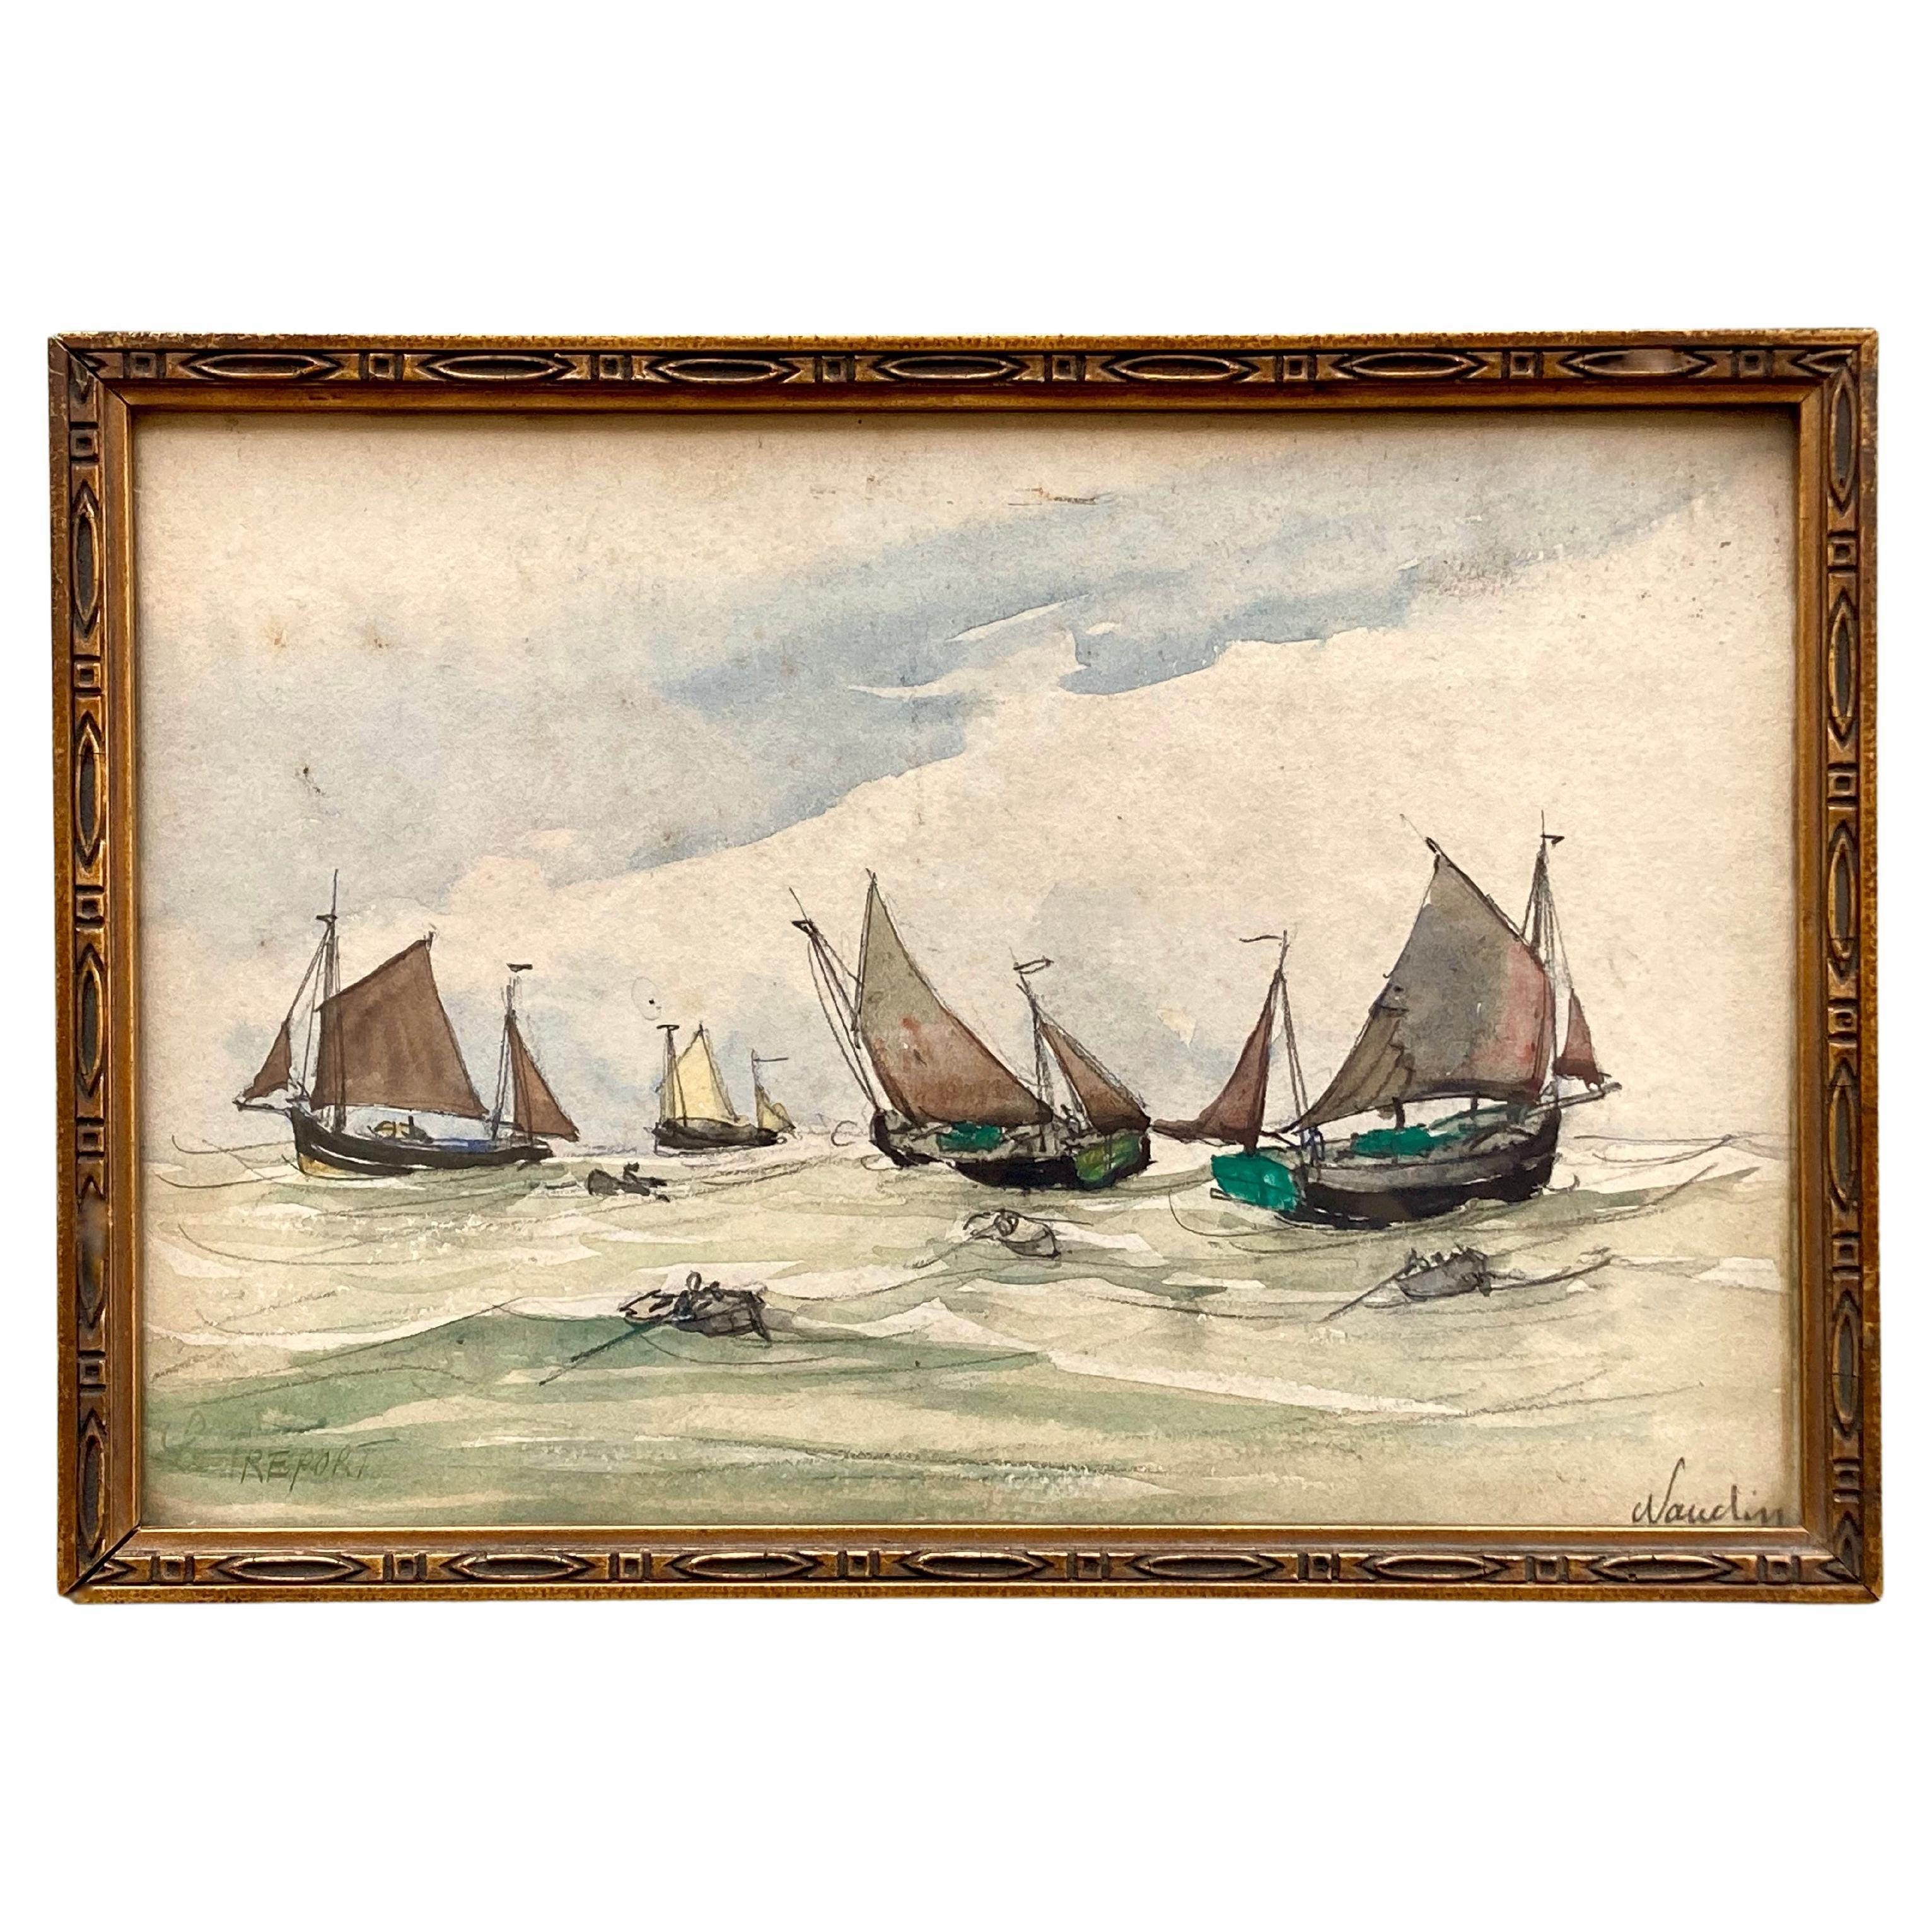 1930s French Seascape in Watercolor by Frank William Boggs 'Frank-Will, Naudin' For Sale